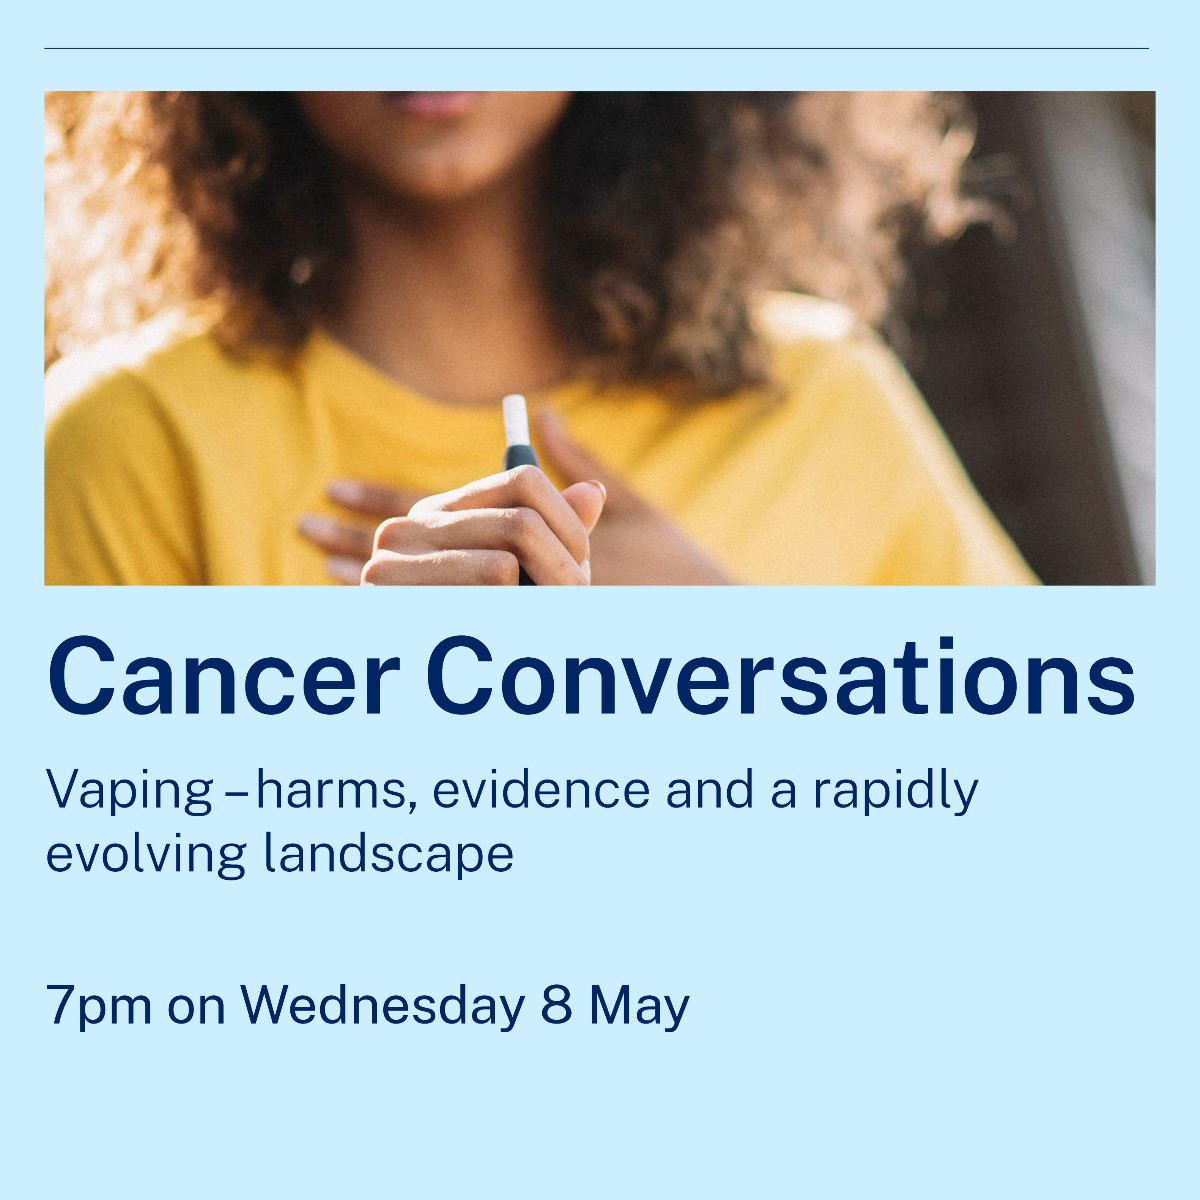 The first Cancer Conversations webinar for this year is on Wednesday 8 May. Discussing Vaping: harms, evidence and a rapidly evolving landscape – featuring Prof @drtraceyobrien and Dr Kerry Chant @NSWCHO. ➡️ Registrations are now open: cancer.nsw.gov.au/what-we-do/eve…